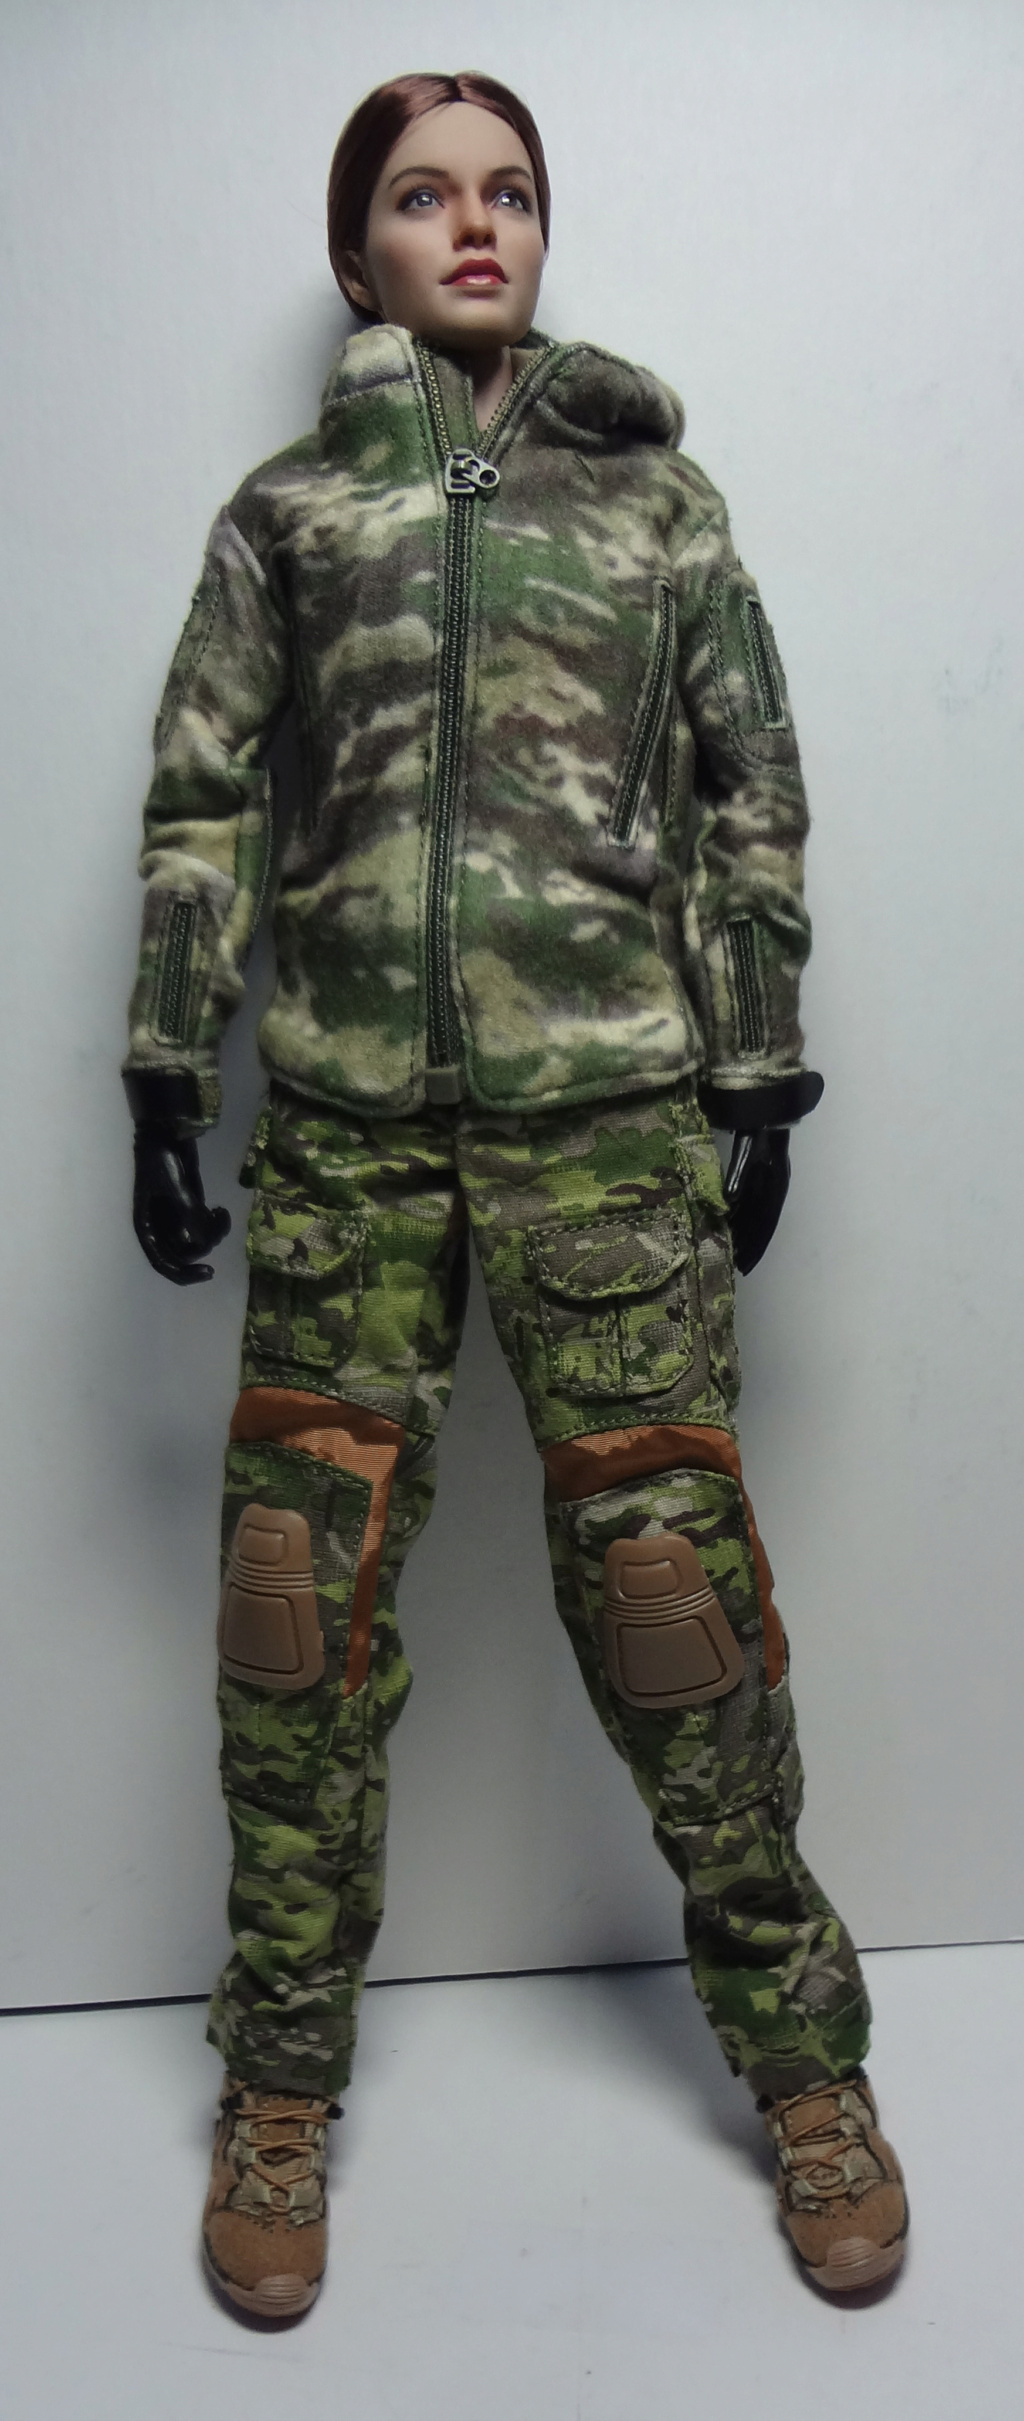 RussianSpecialCombat - NEW PRODUCT: VERYCOOL: 1/6 Miss Spetsnaz: Russian Special Combat Russian special combat female action figure (#VCF-2052) - Page 4 0310